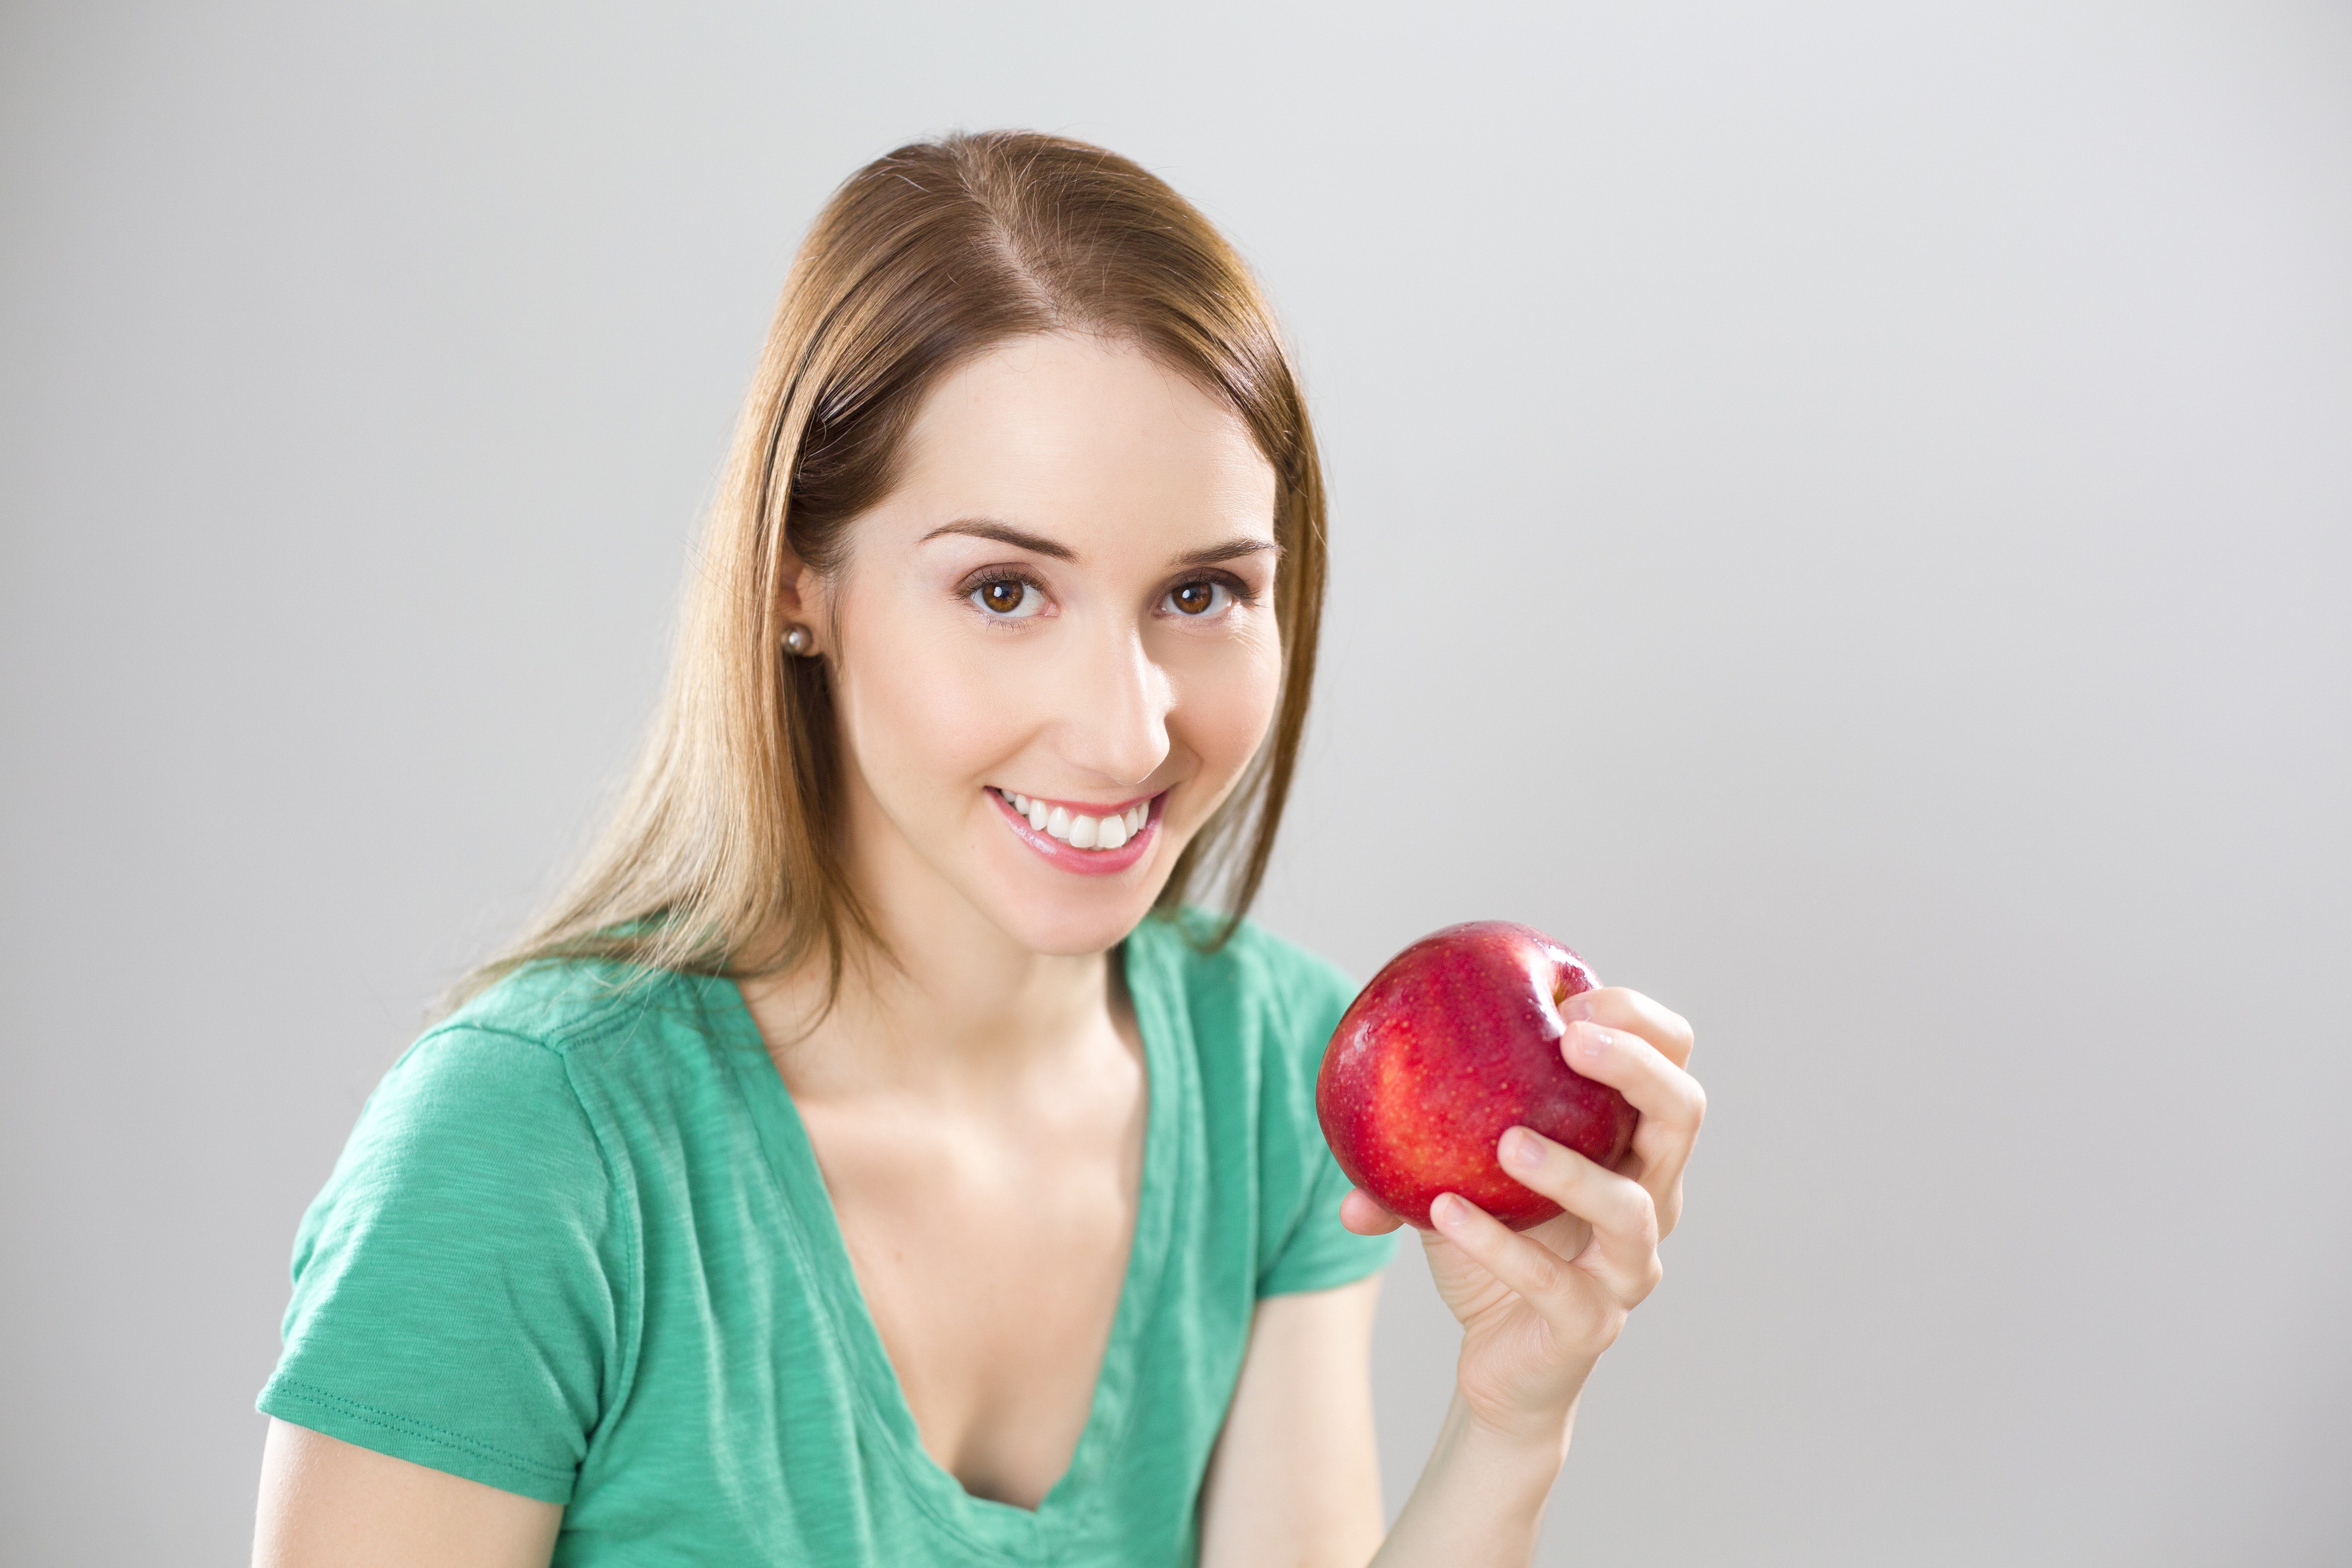 Portrait of young woman eating fruit against white background photo